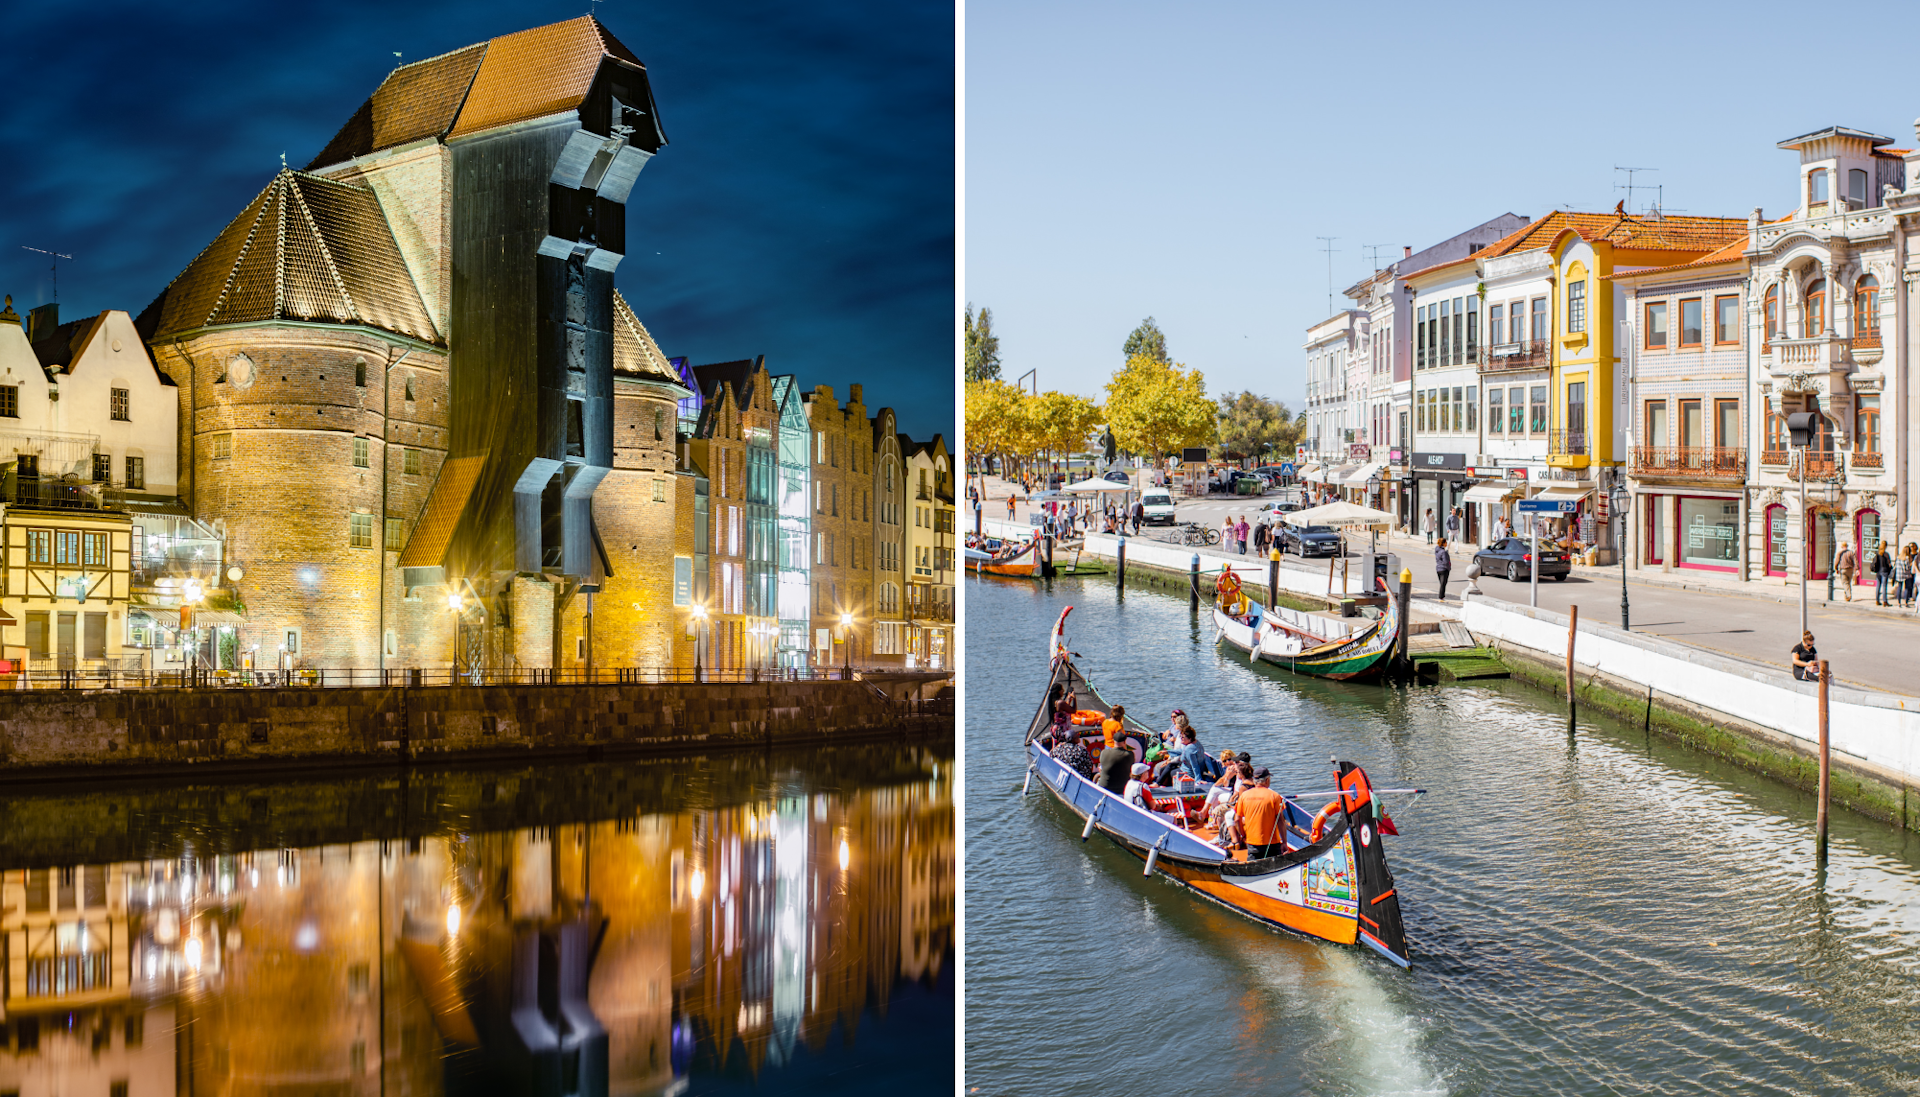 The Crane of Gdansk; the water channel with boats and colorful old buildings in Aveiro.